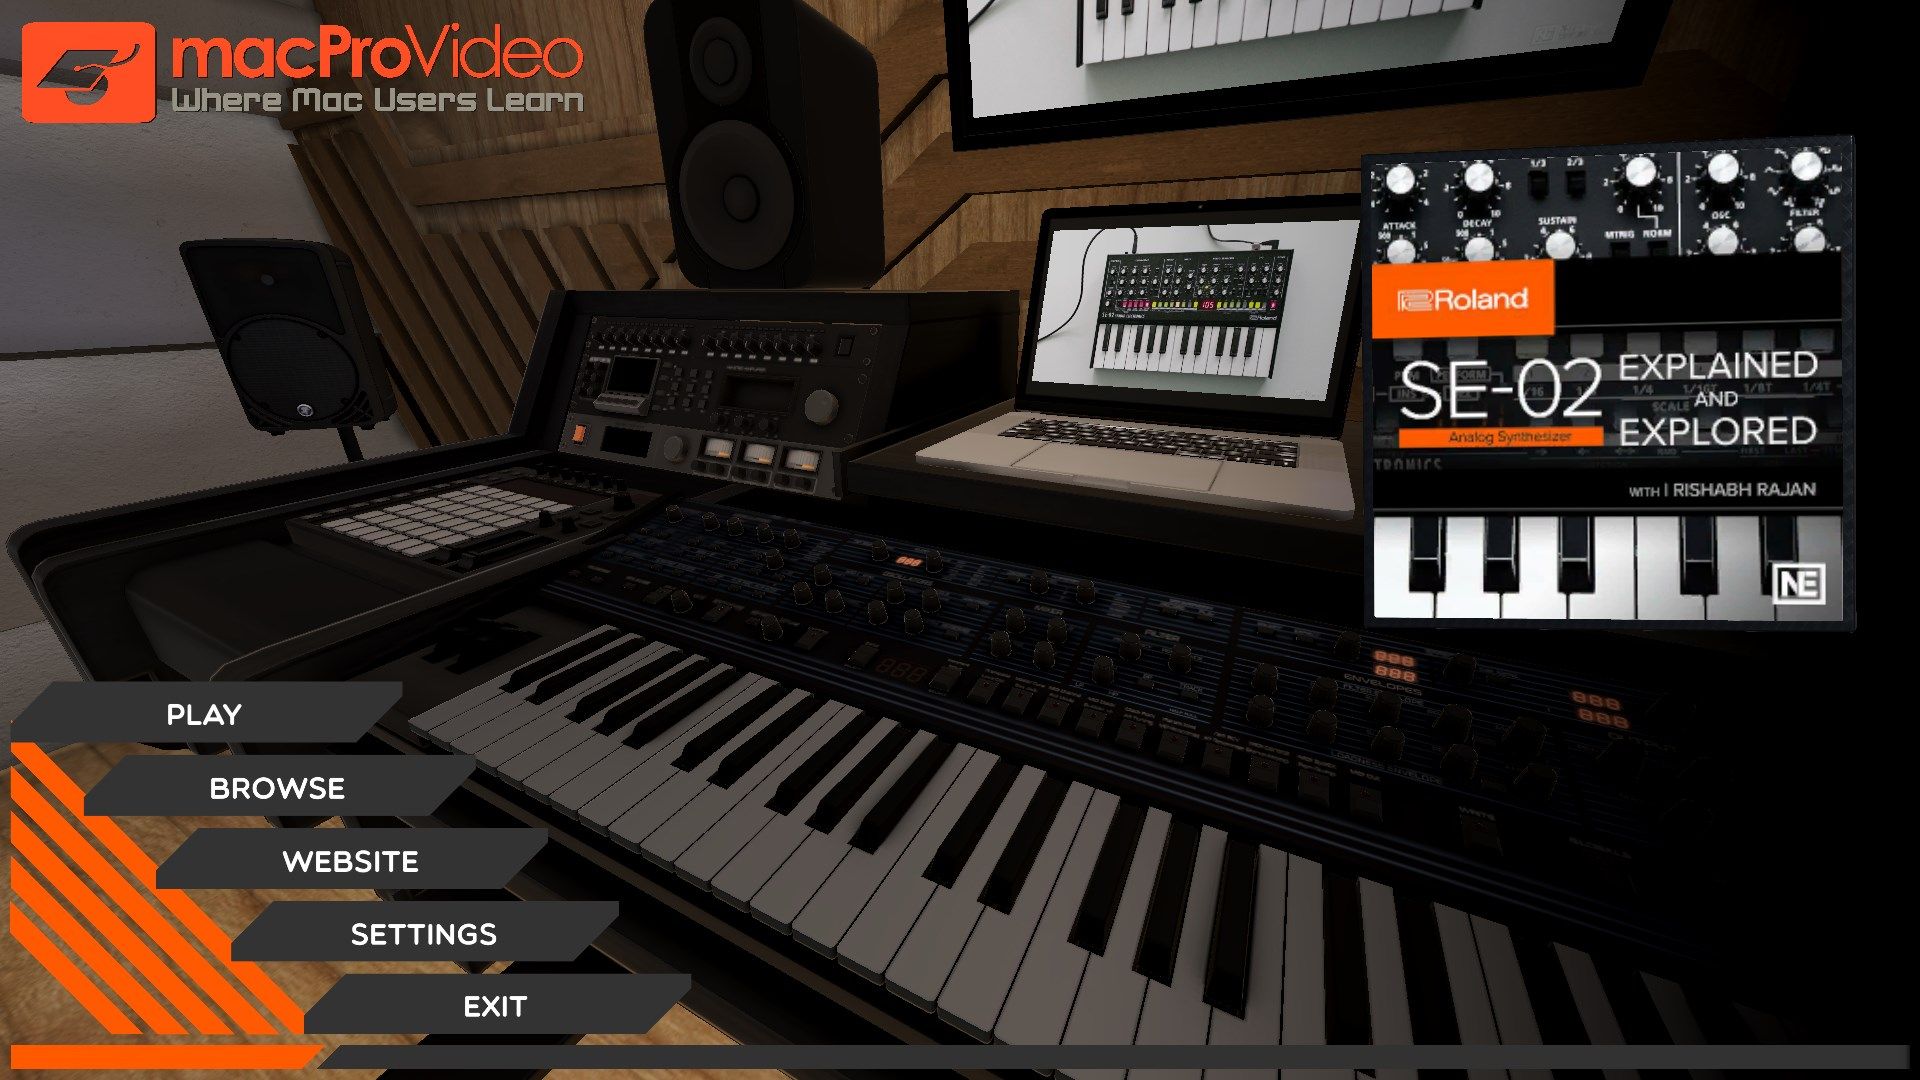 SE-02 Explained Course By macProVideo